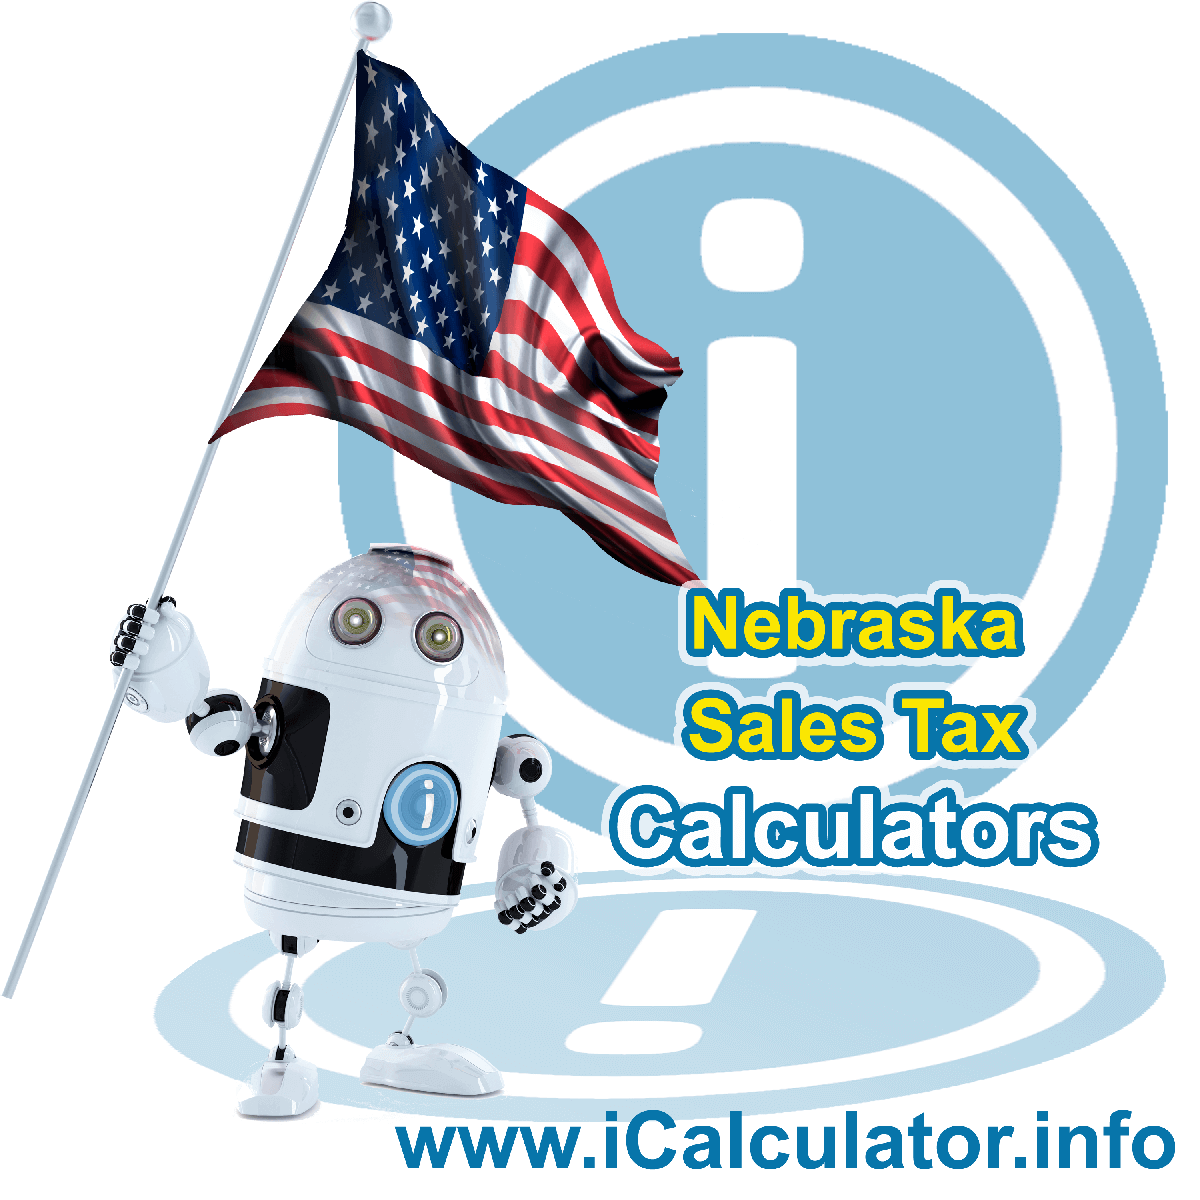 North Bend Sales Rates: This image illustrates a calculator robot calculating North Bend sales tax manually using the North Bend Sales Tax Formula. You can use this information to calculate North Bend Sales Tax manually or use the North Bend Sales Tax Calculator to calculate sales tax online.